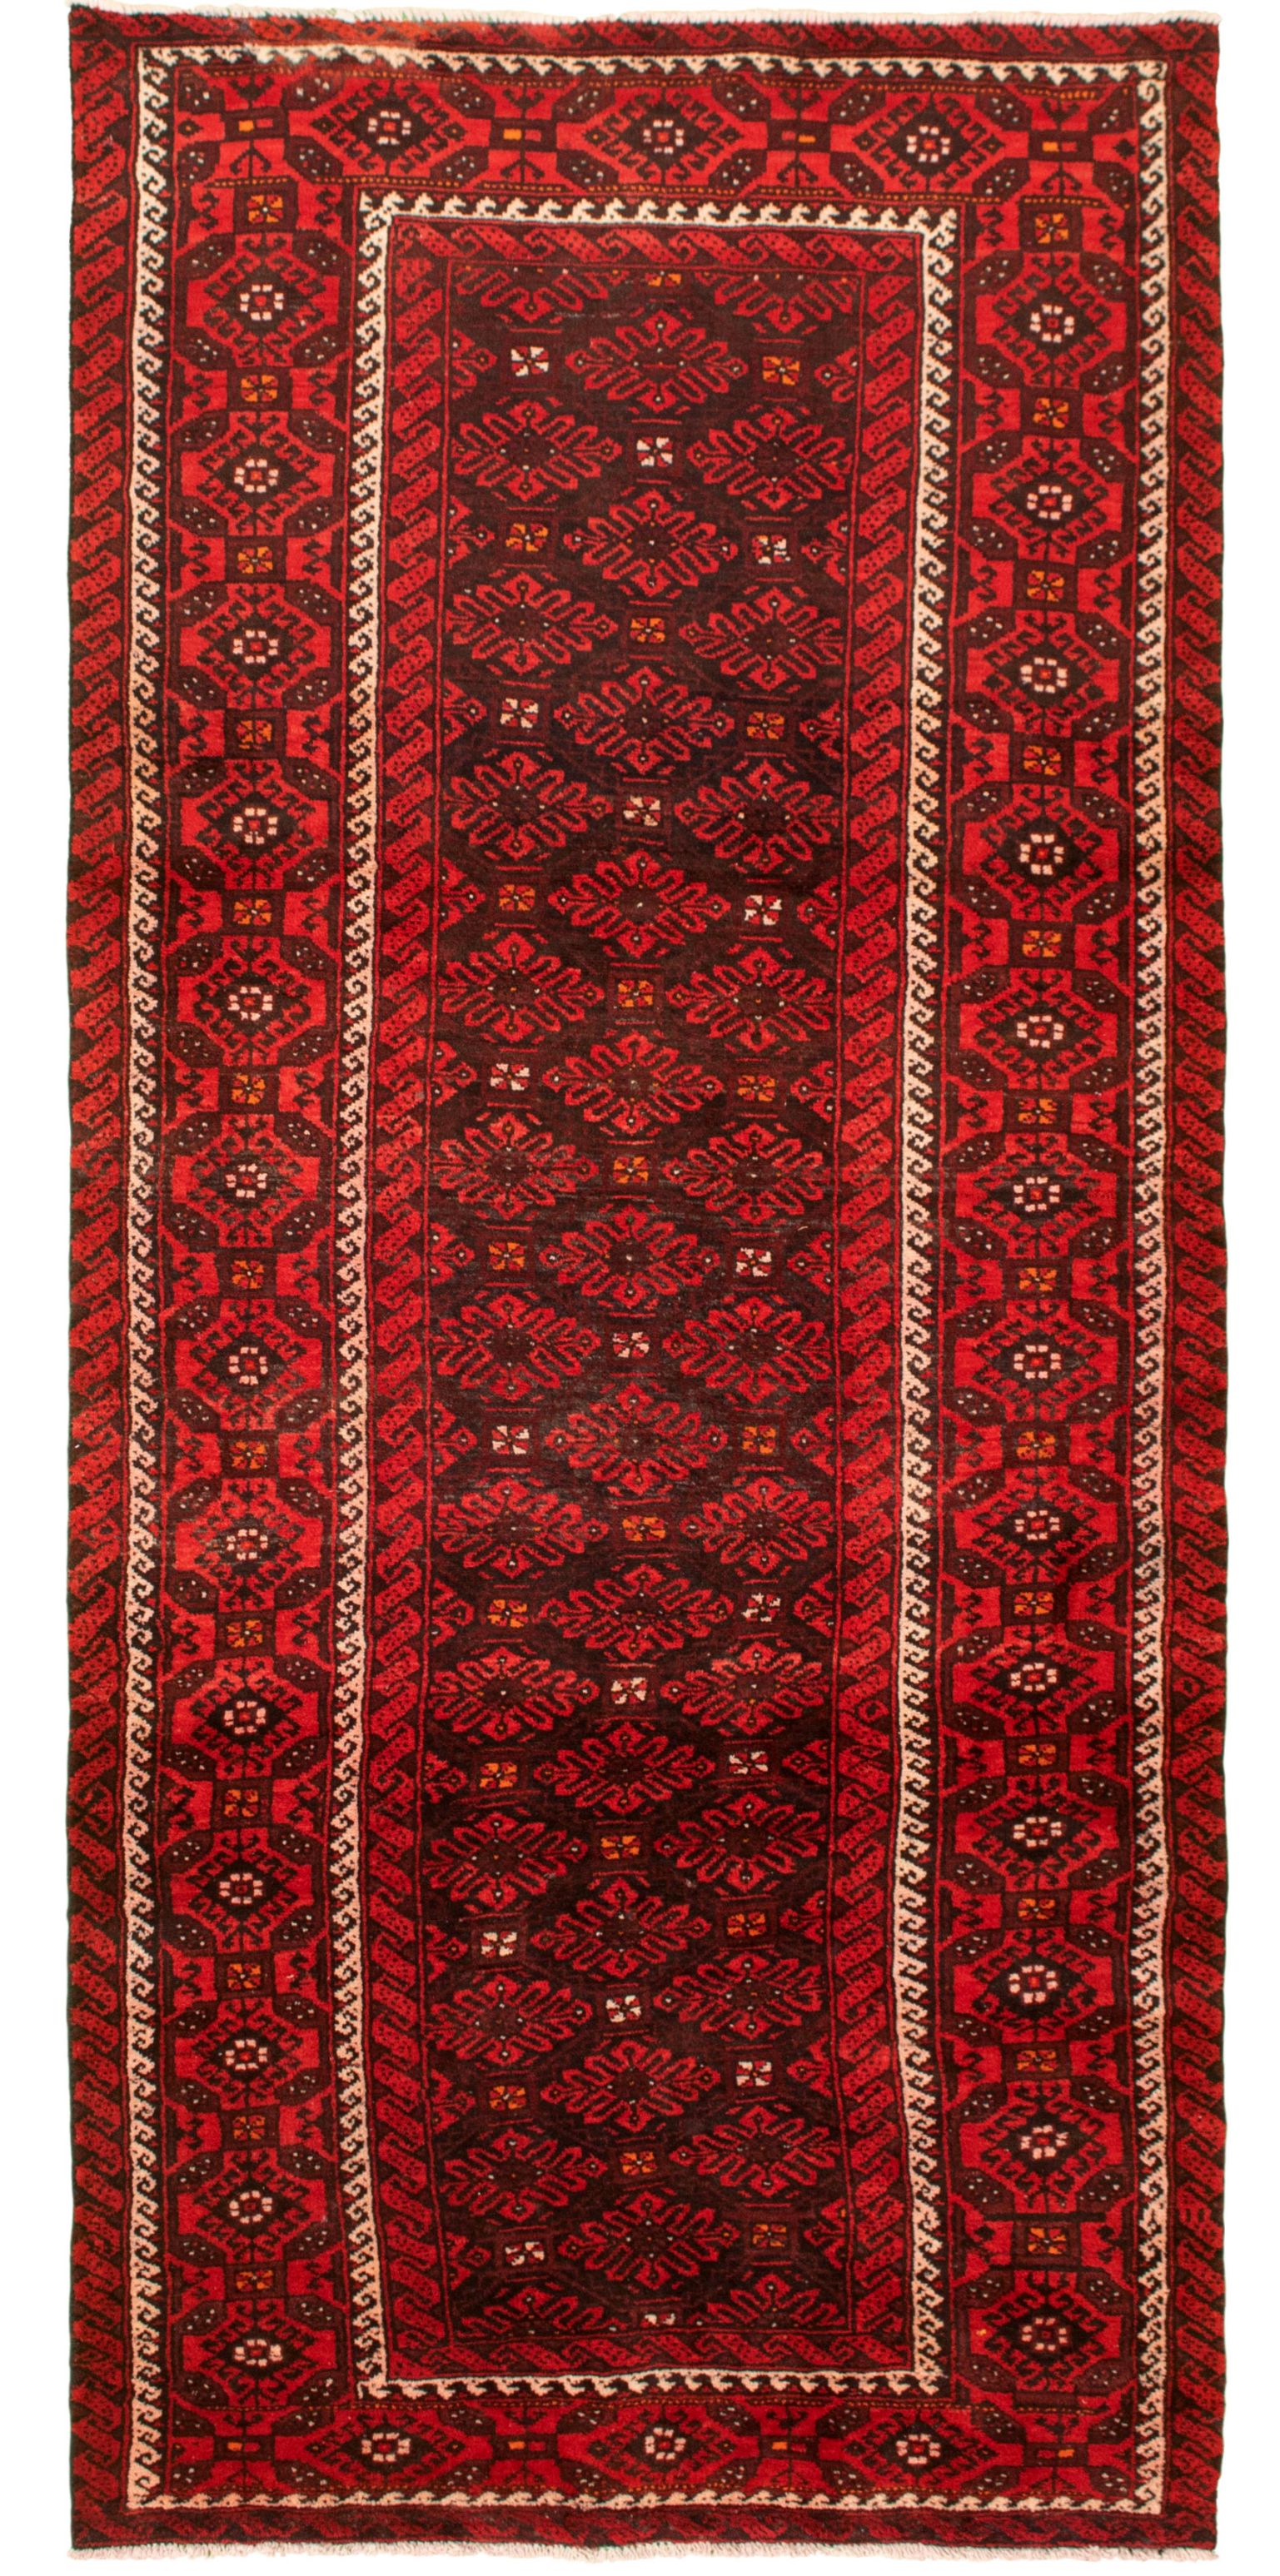 Hand-knotted Authentic Turkish Red Wool Rug 4'4" x 9'9" Size: 4'4" x 9'9"  